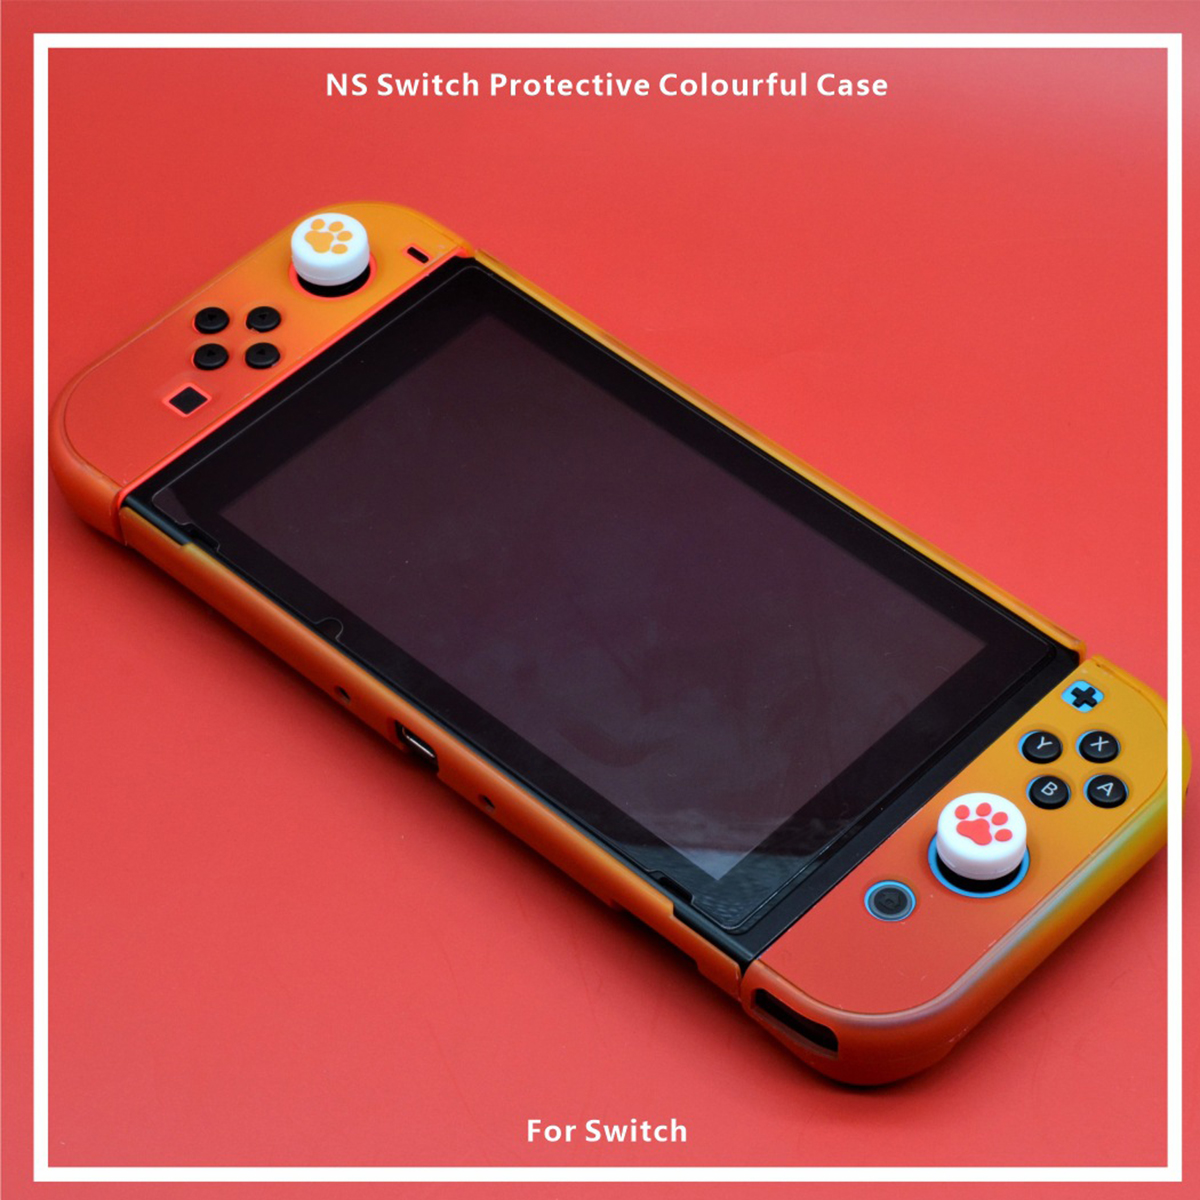 Colorful-Shockproof-Shell-Gradient-Case-Protector-for-Nintendo-Switch-Game-Console-Protective-Hard-C-1737853-1